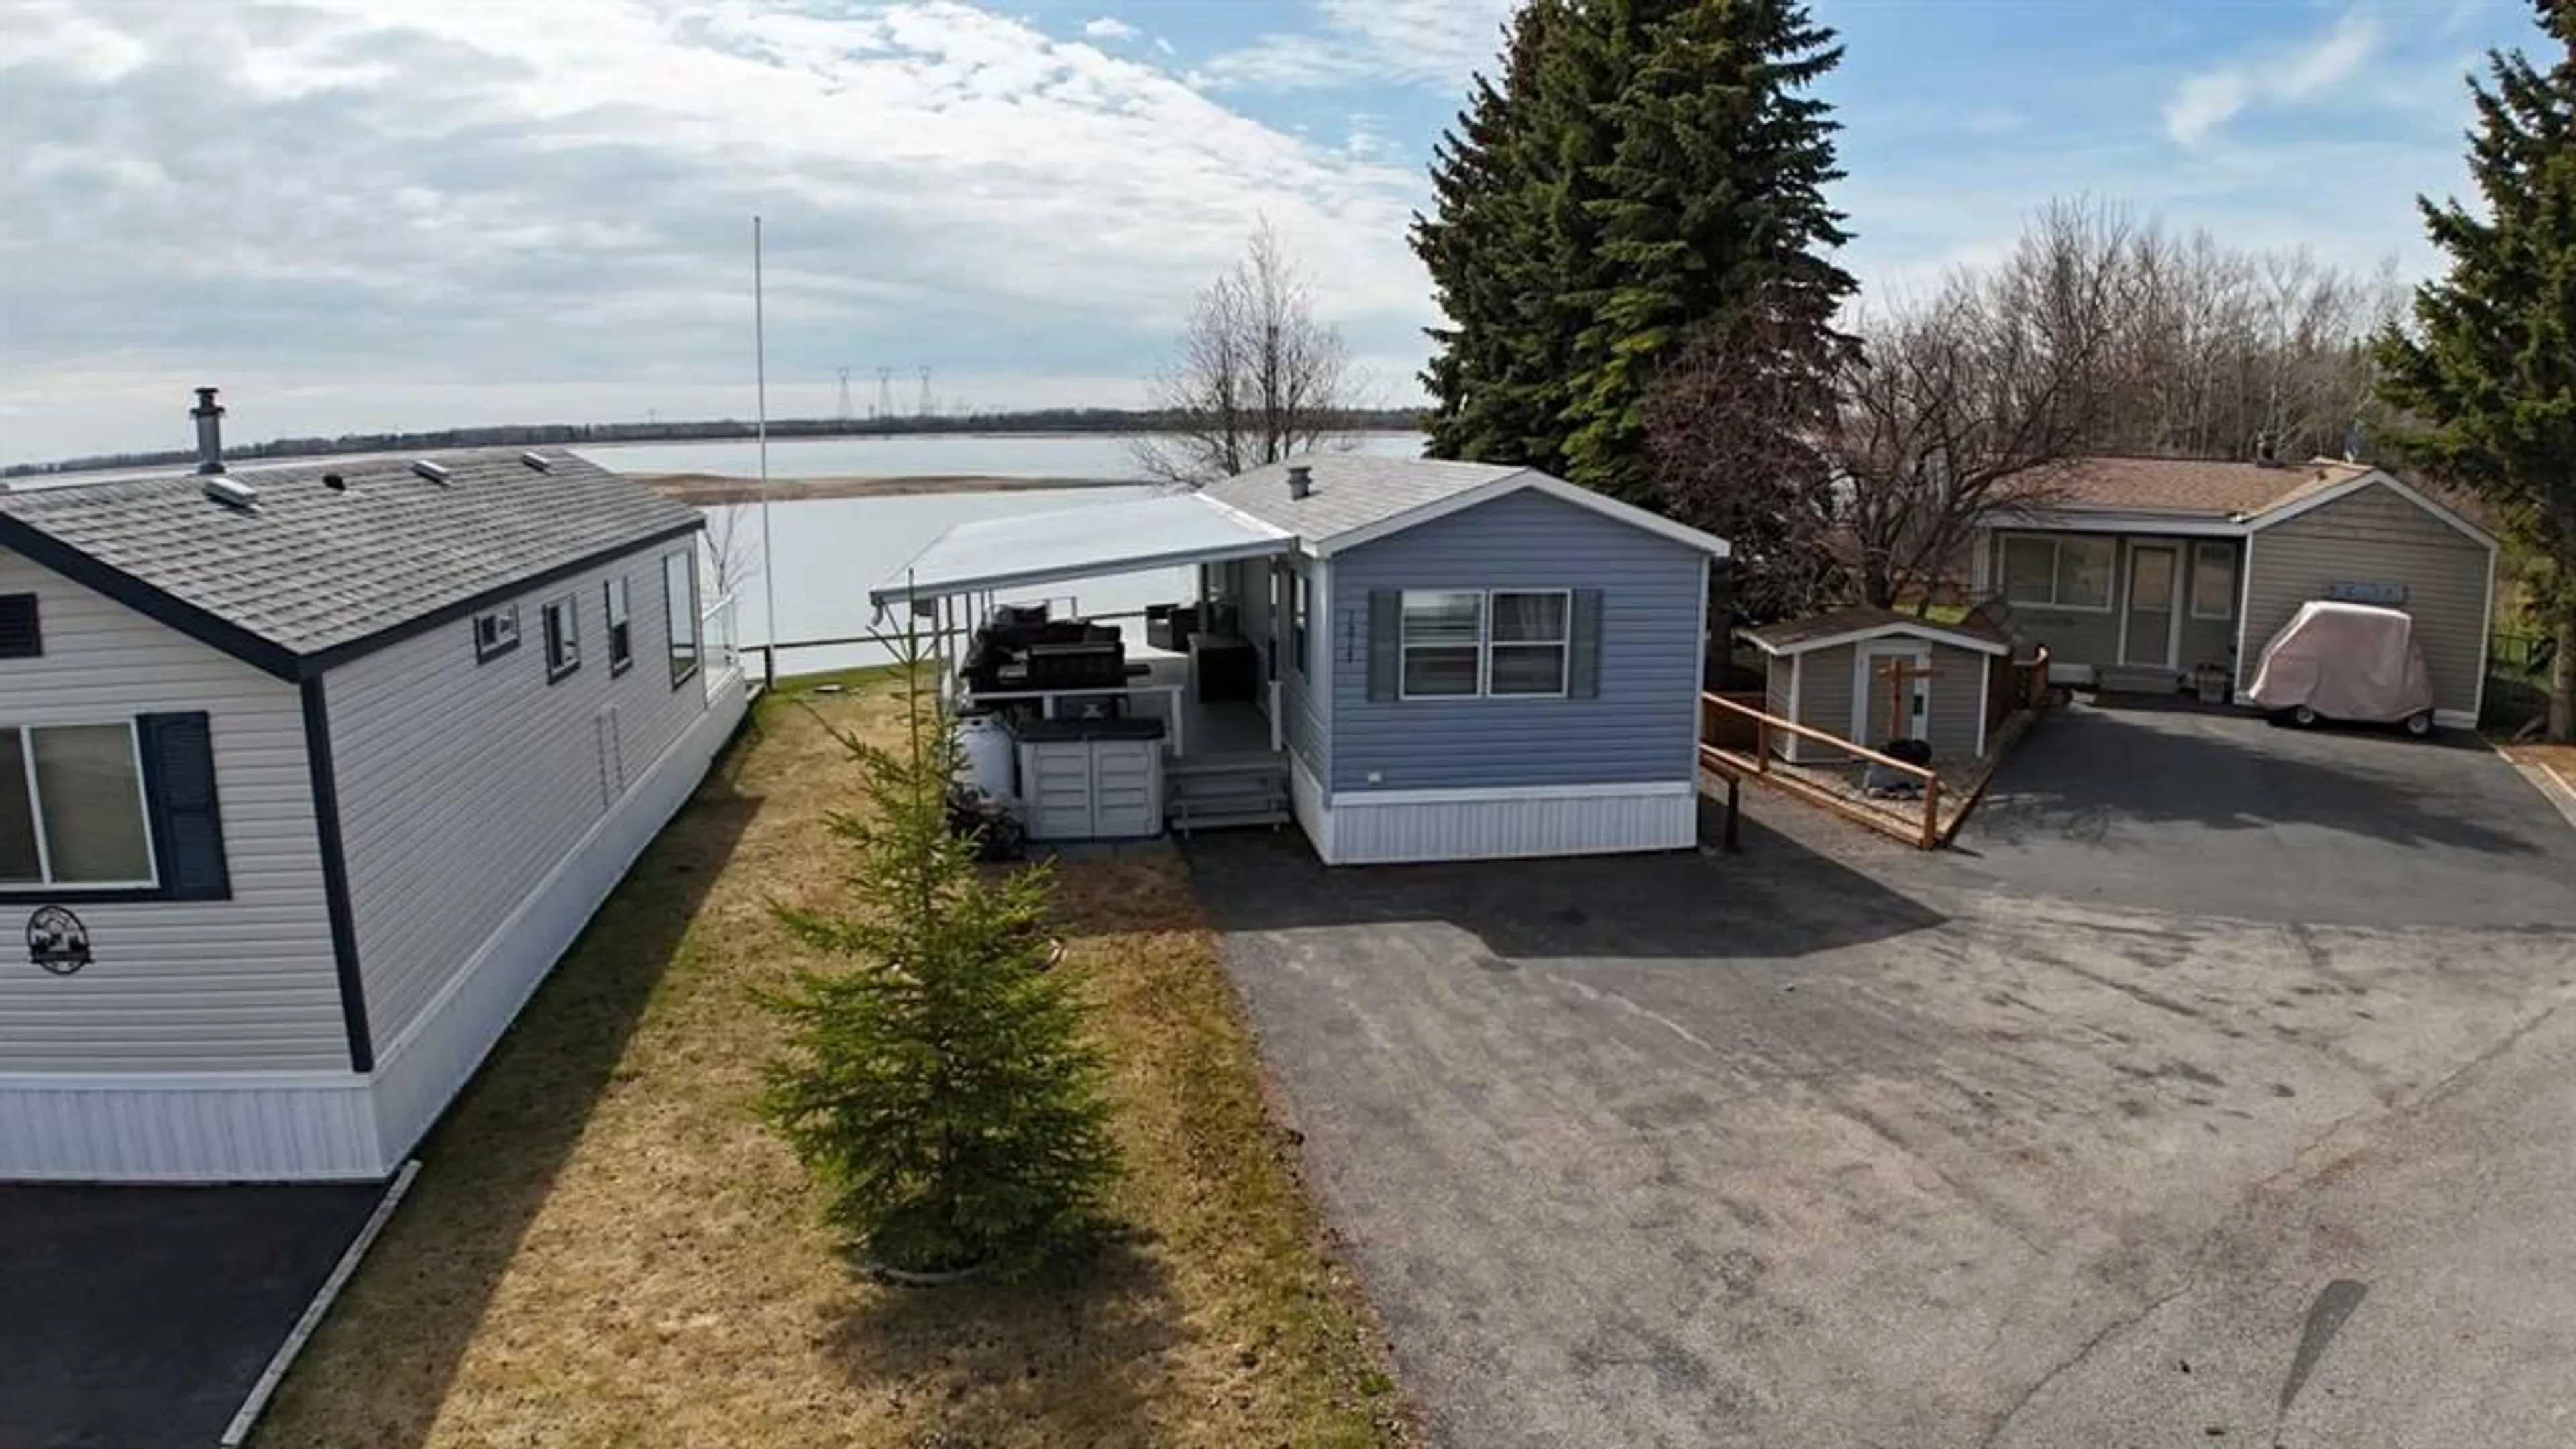 A pic from exterior of the house or condo for 35468 Range Road 30 #1017, Rural Red Deer County Alberta T4R 2R3